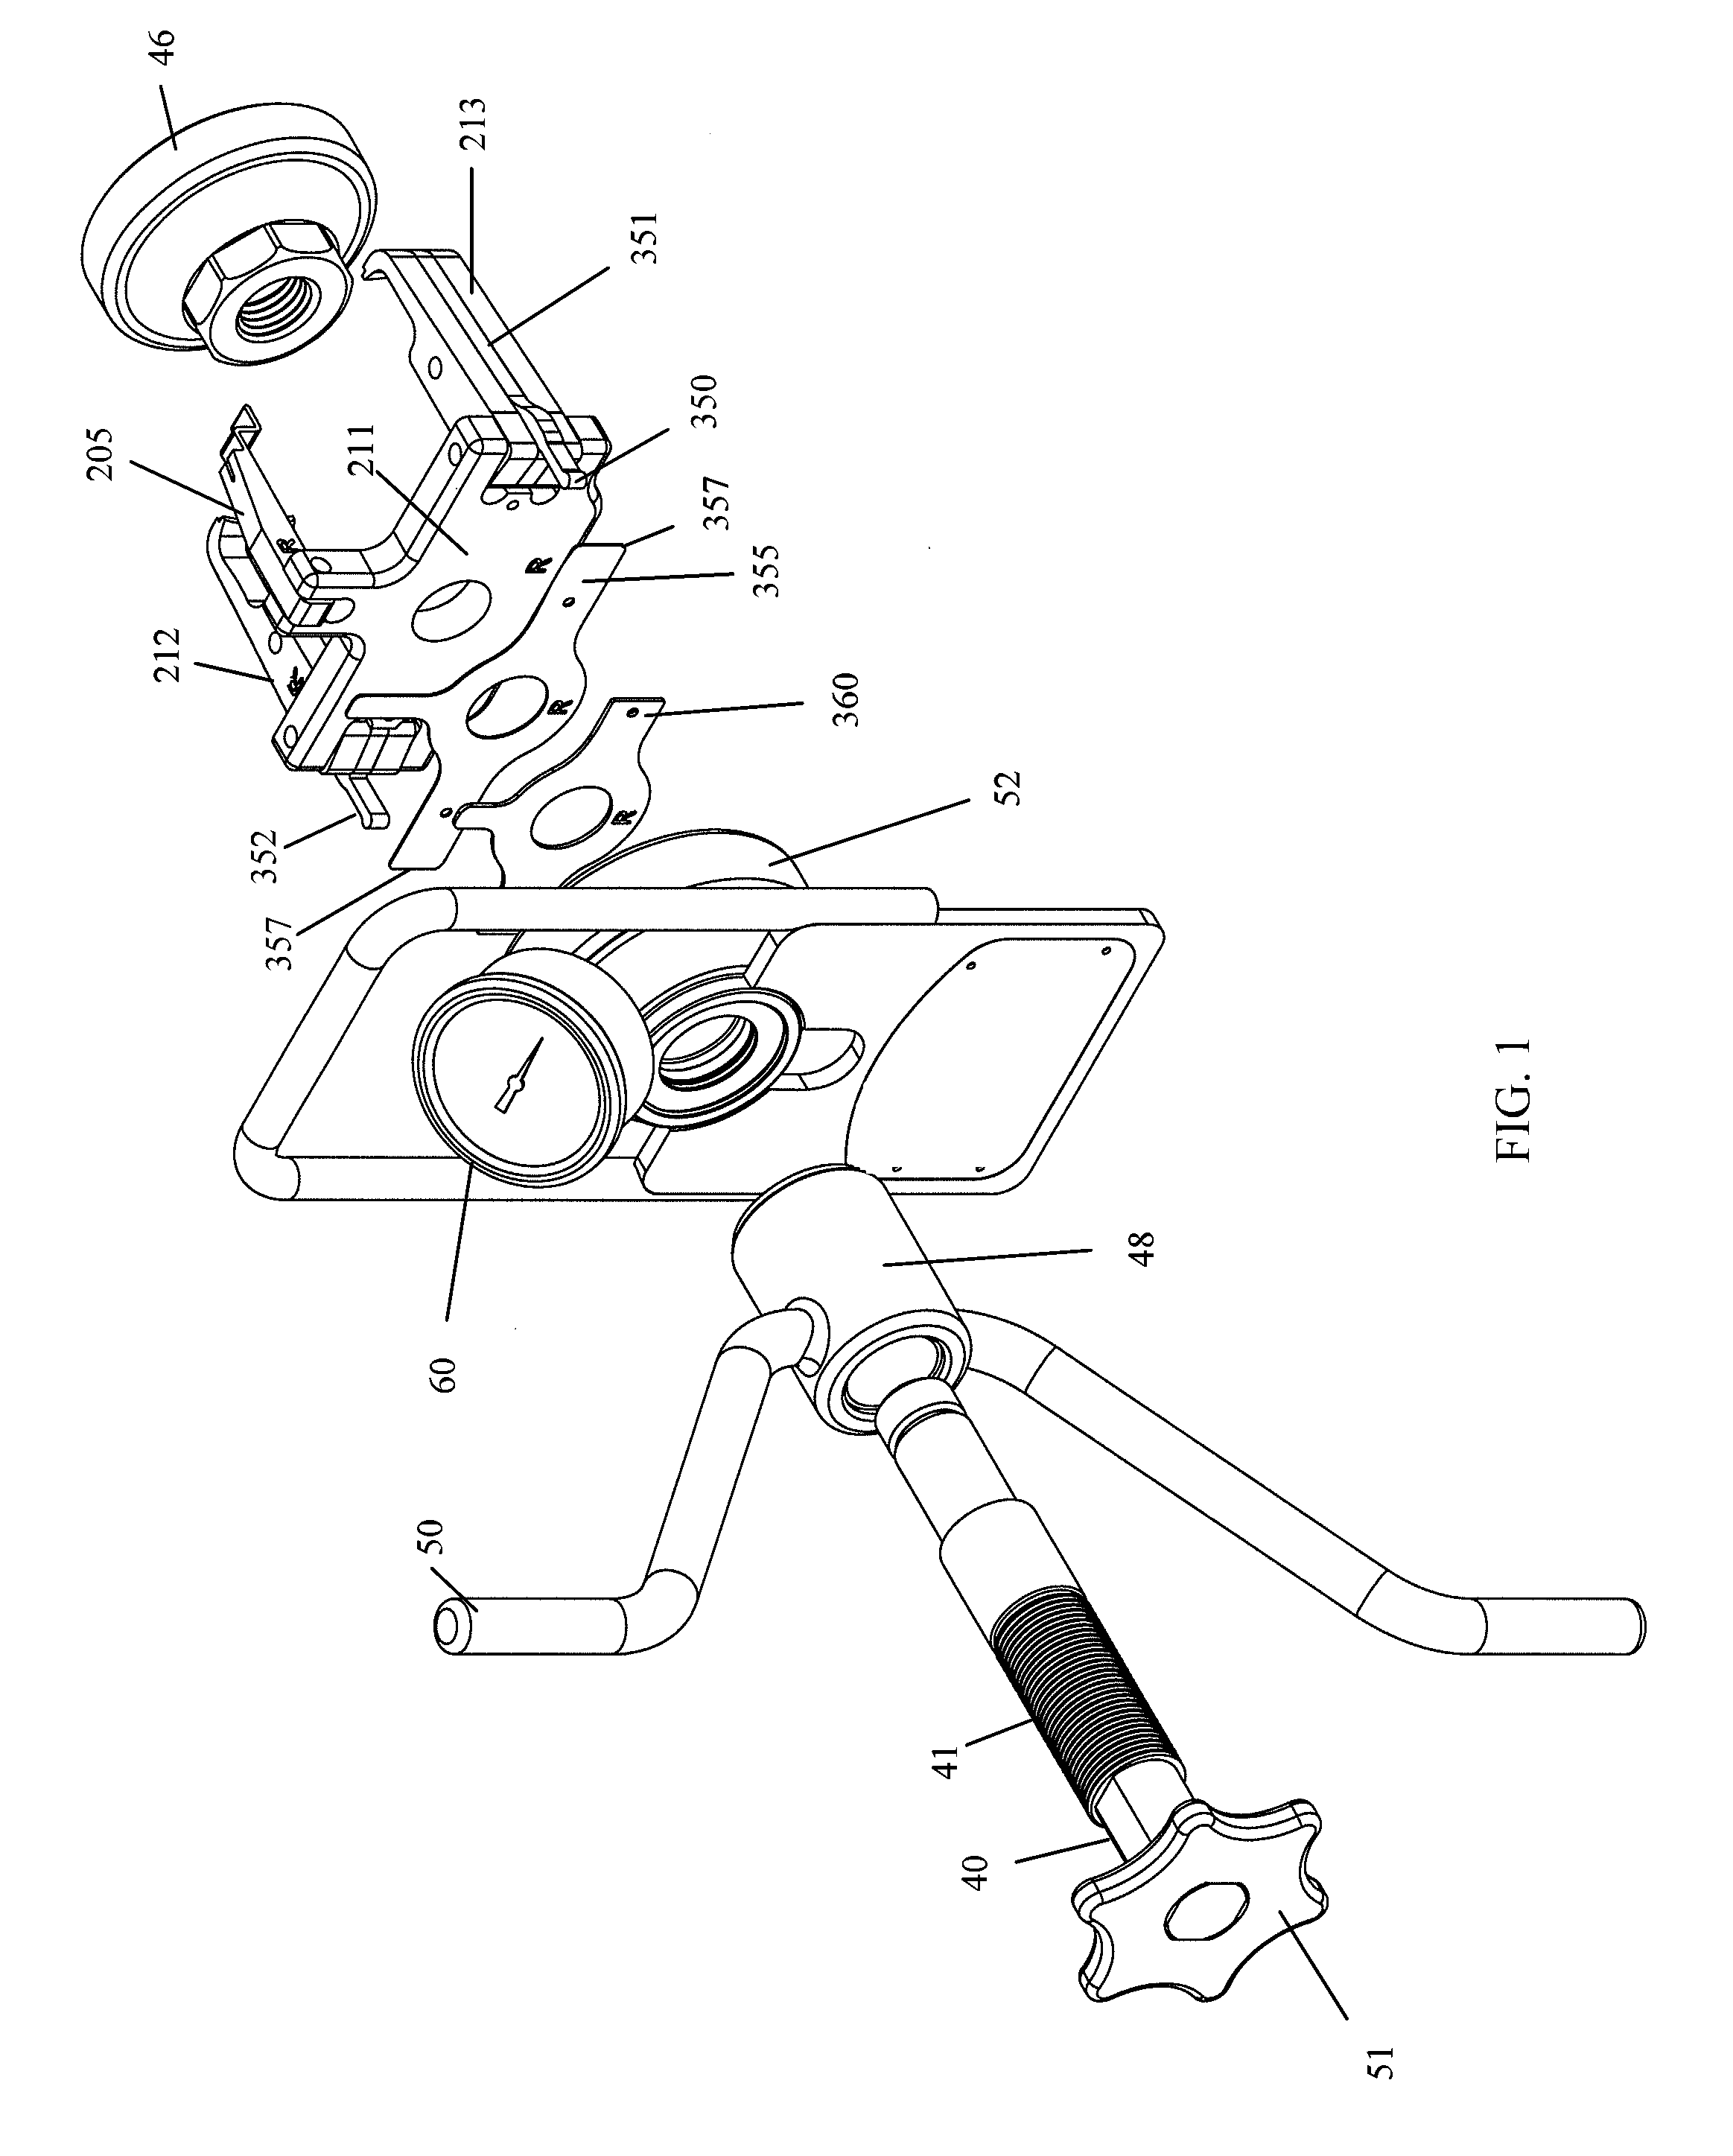 Systems for preloading a bearing and aligning a lock nut